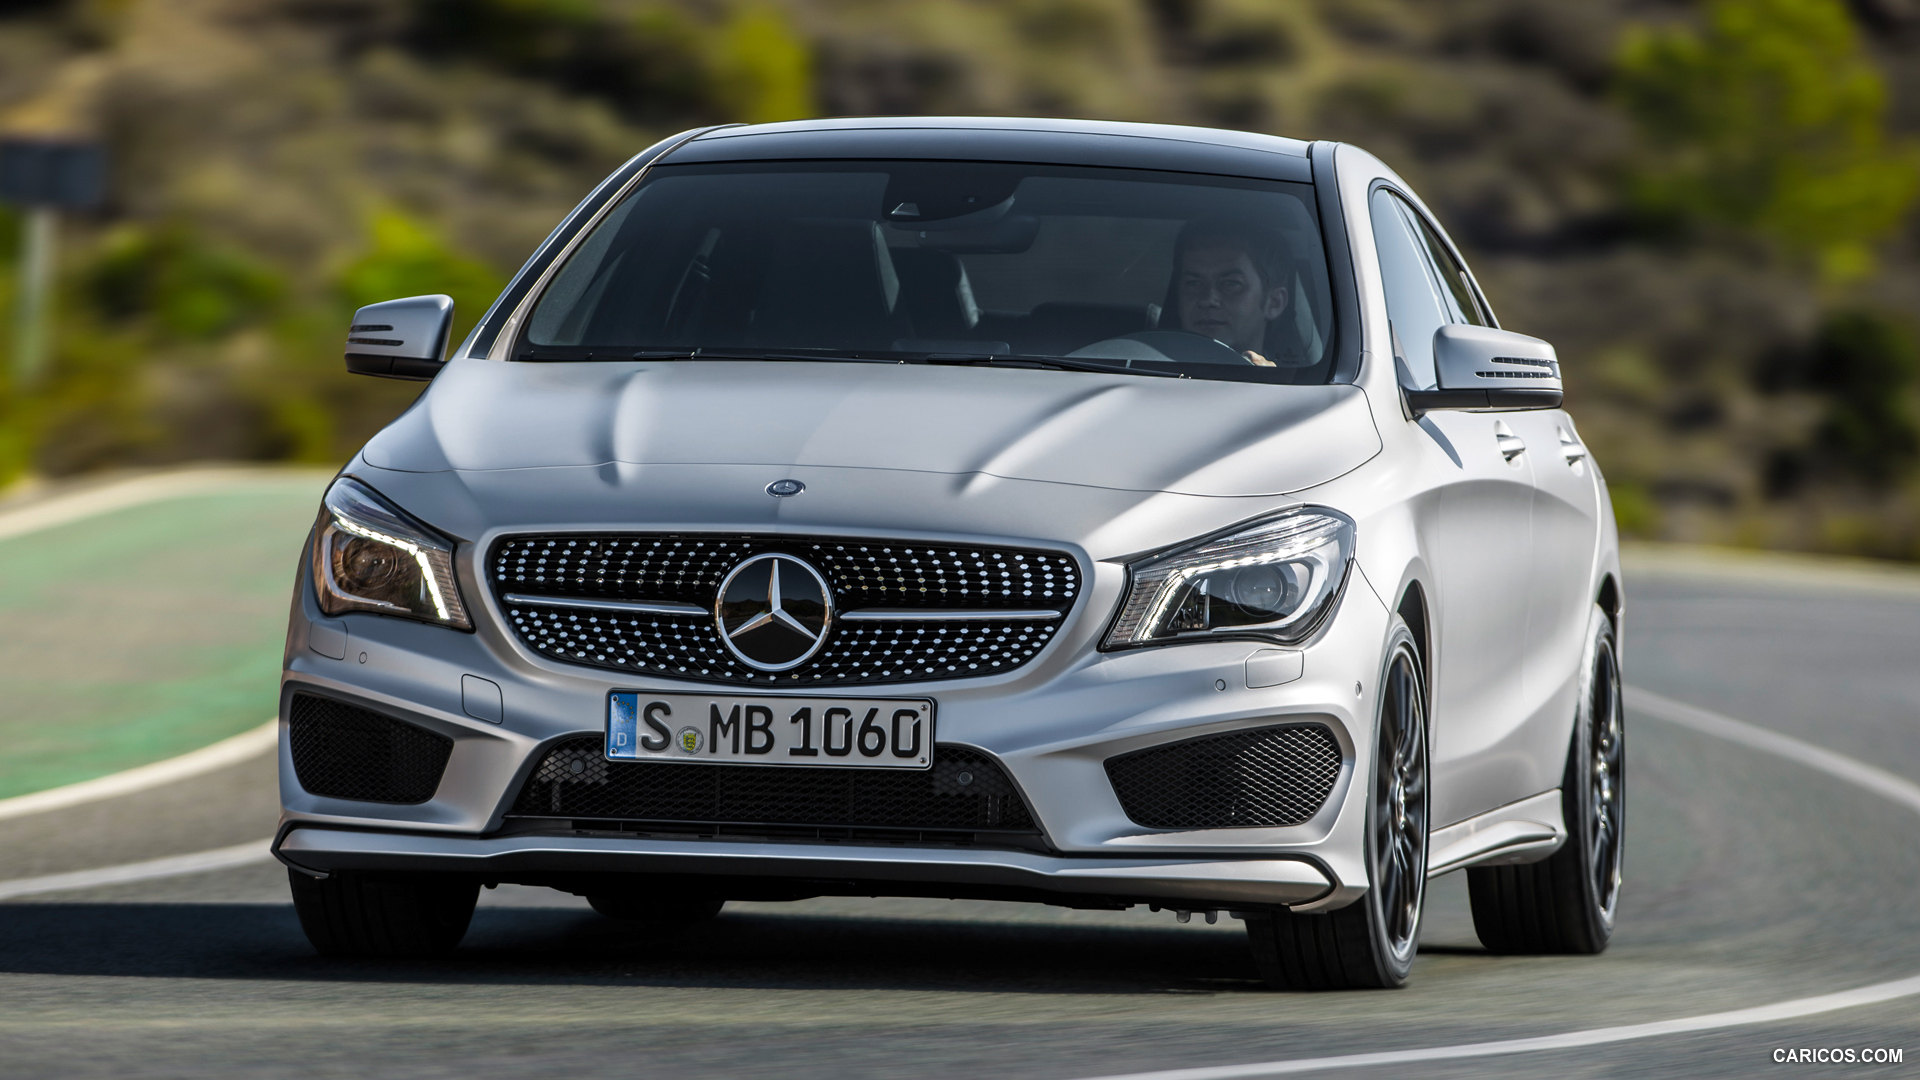 2014 Mercedes-Benz CLA-Class CLA 250 Edition 1 - Front, #1 of 183